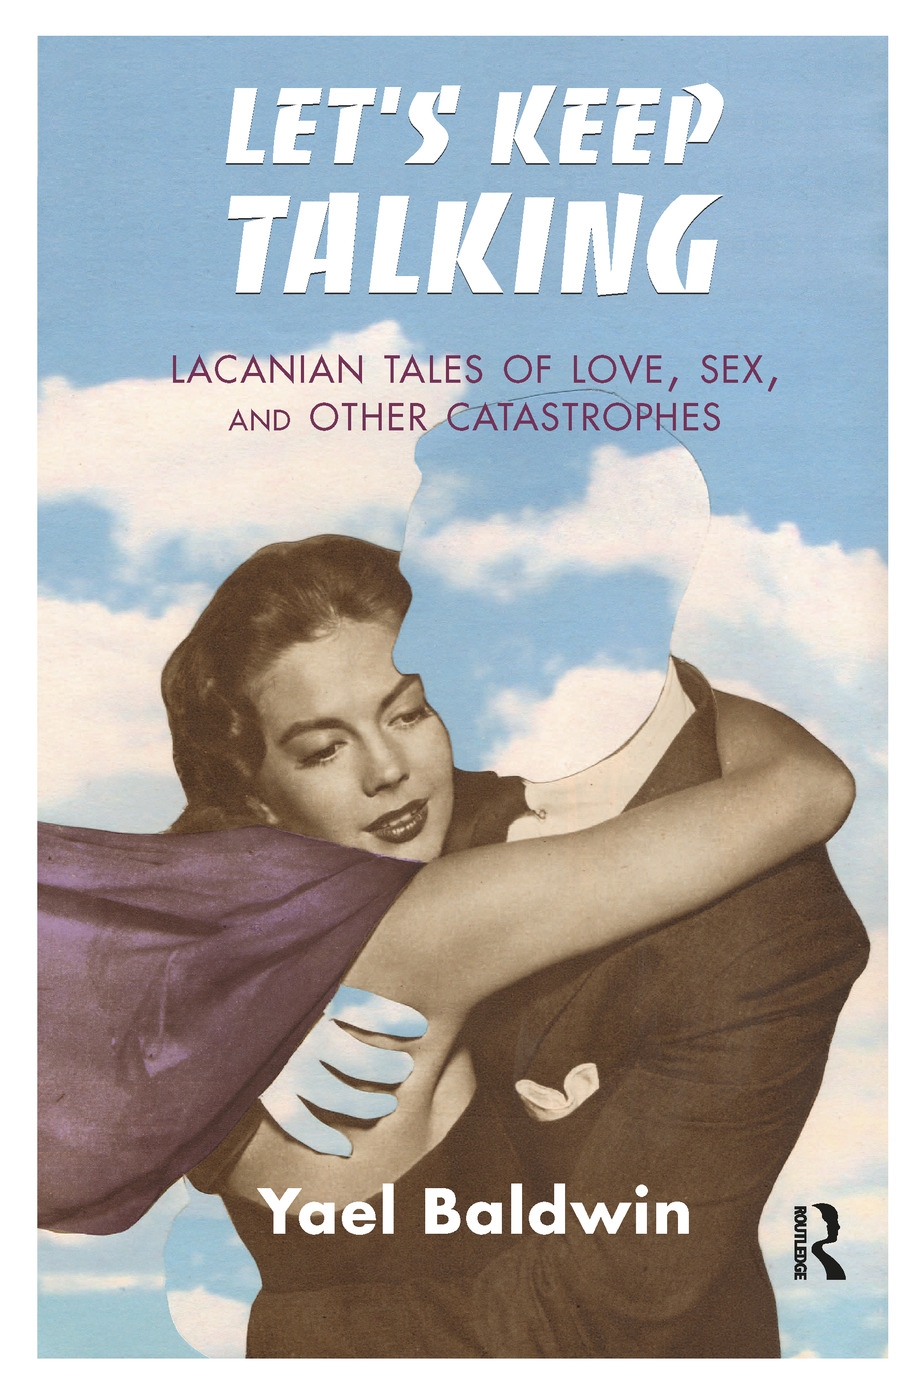 Let’s Keep Talking: Lacanian Tales of Love, Sex, and Other Catastrophes